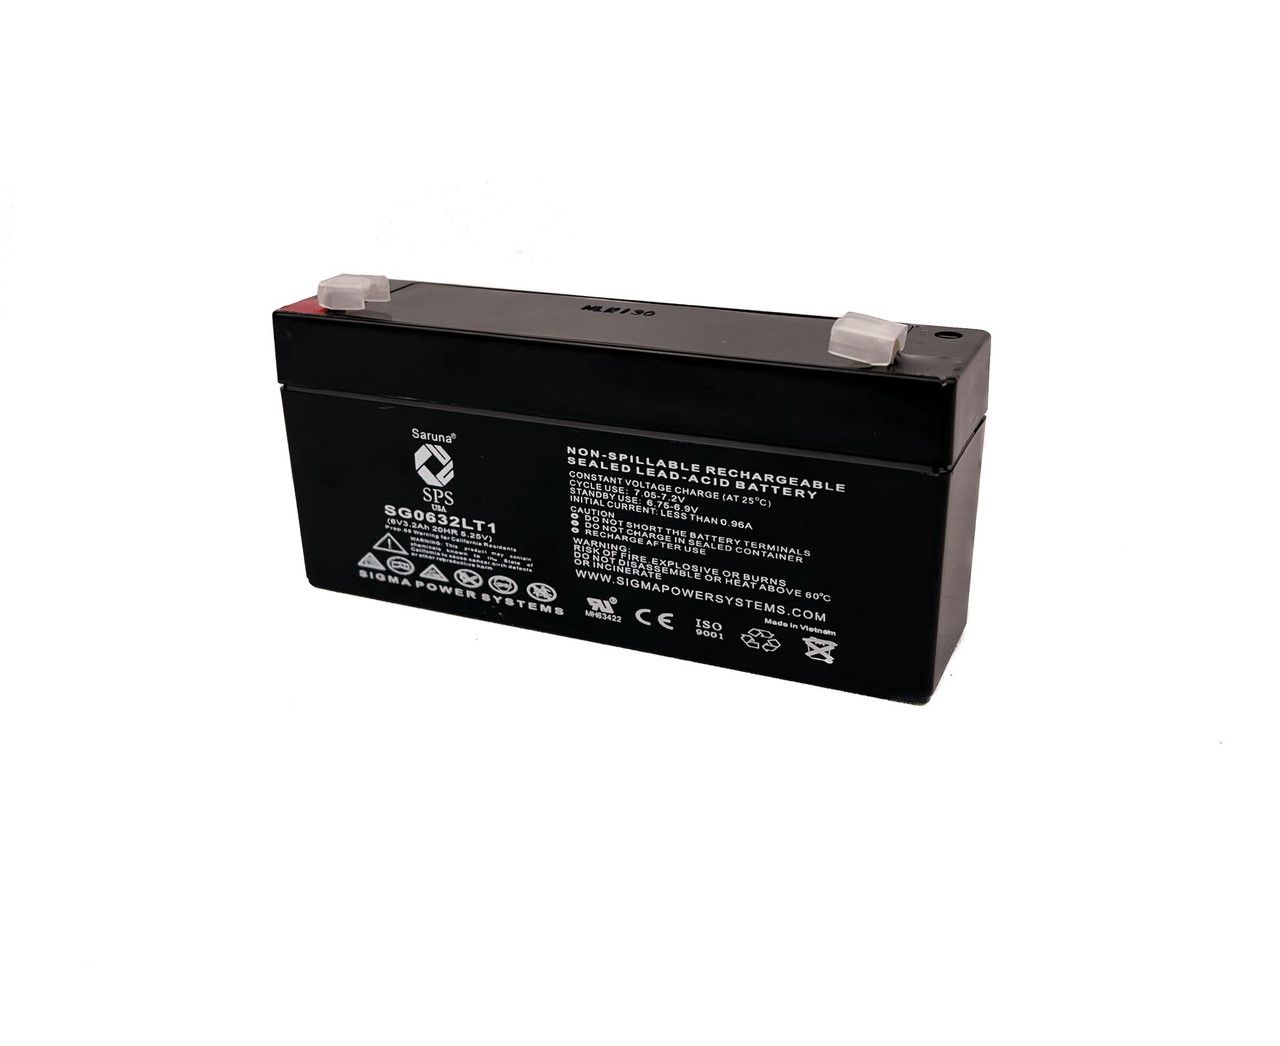 Raion Power 6V 3.2Ah Non-Spillable Replacement Rechargebale Battery for Rigel 309 E.C.G. Monitor